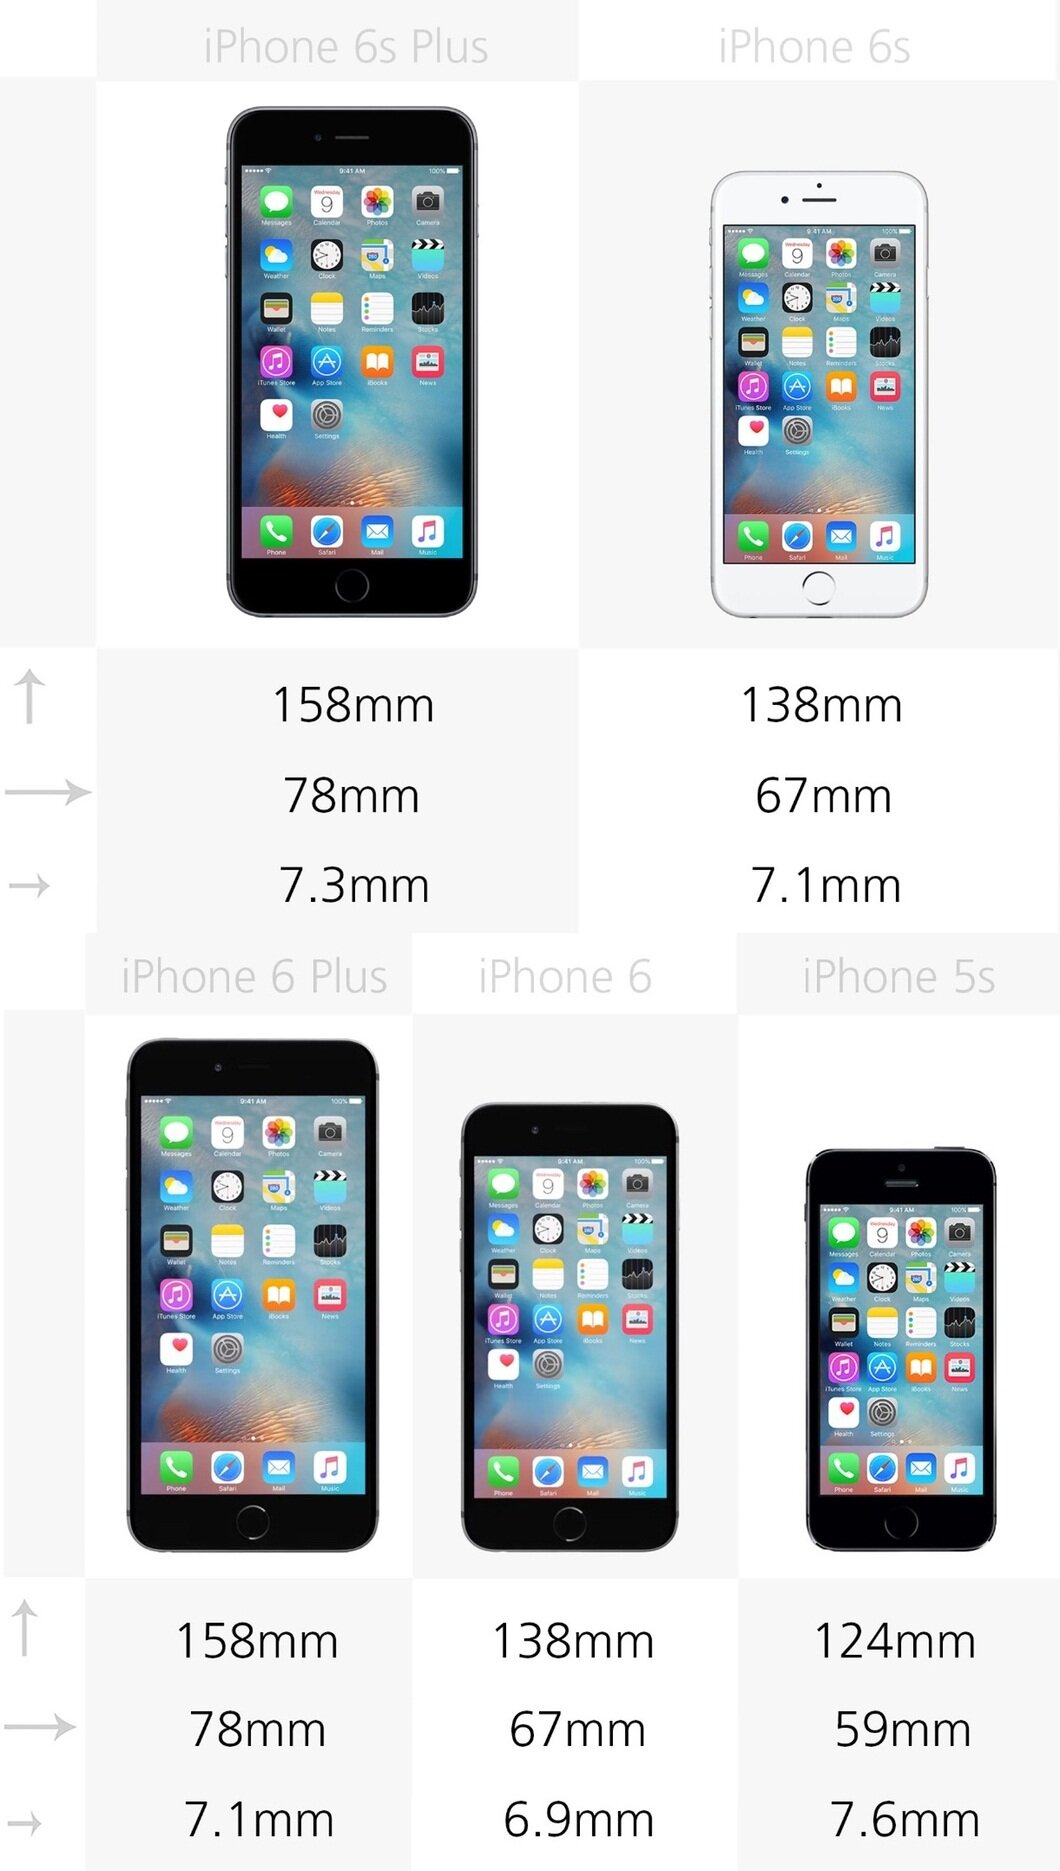 So Sánh Điện Thoại Iphone 6S Plus, Iphone 6S, Iphone 6 Plus, Iphone 6 Và  Iphone 5S (Phần 1) | Websosanh.Vn